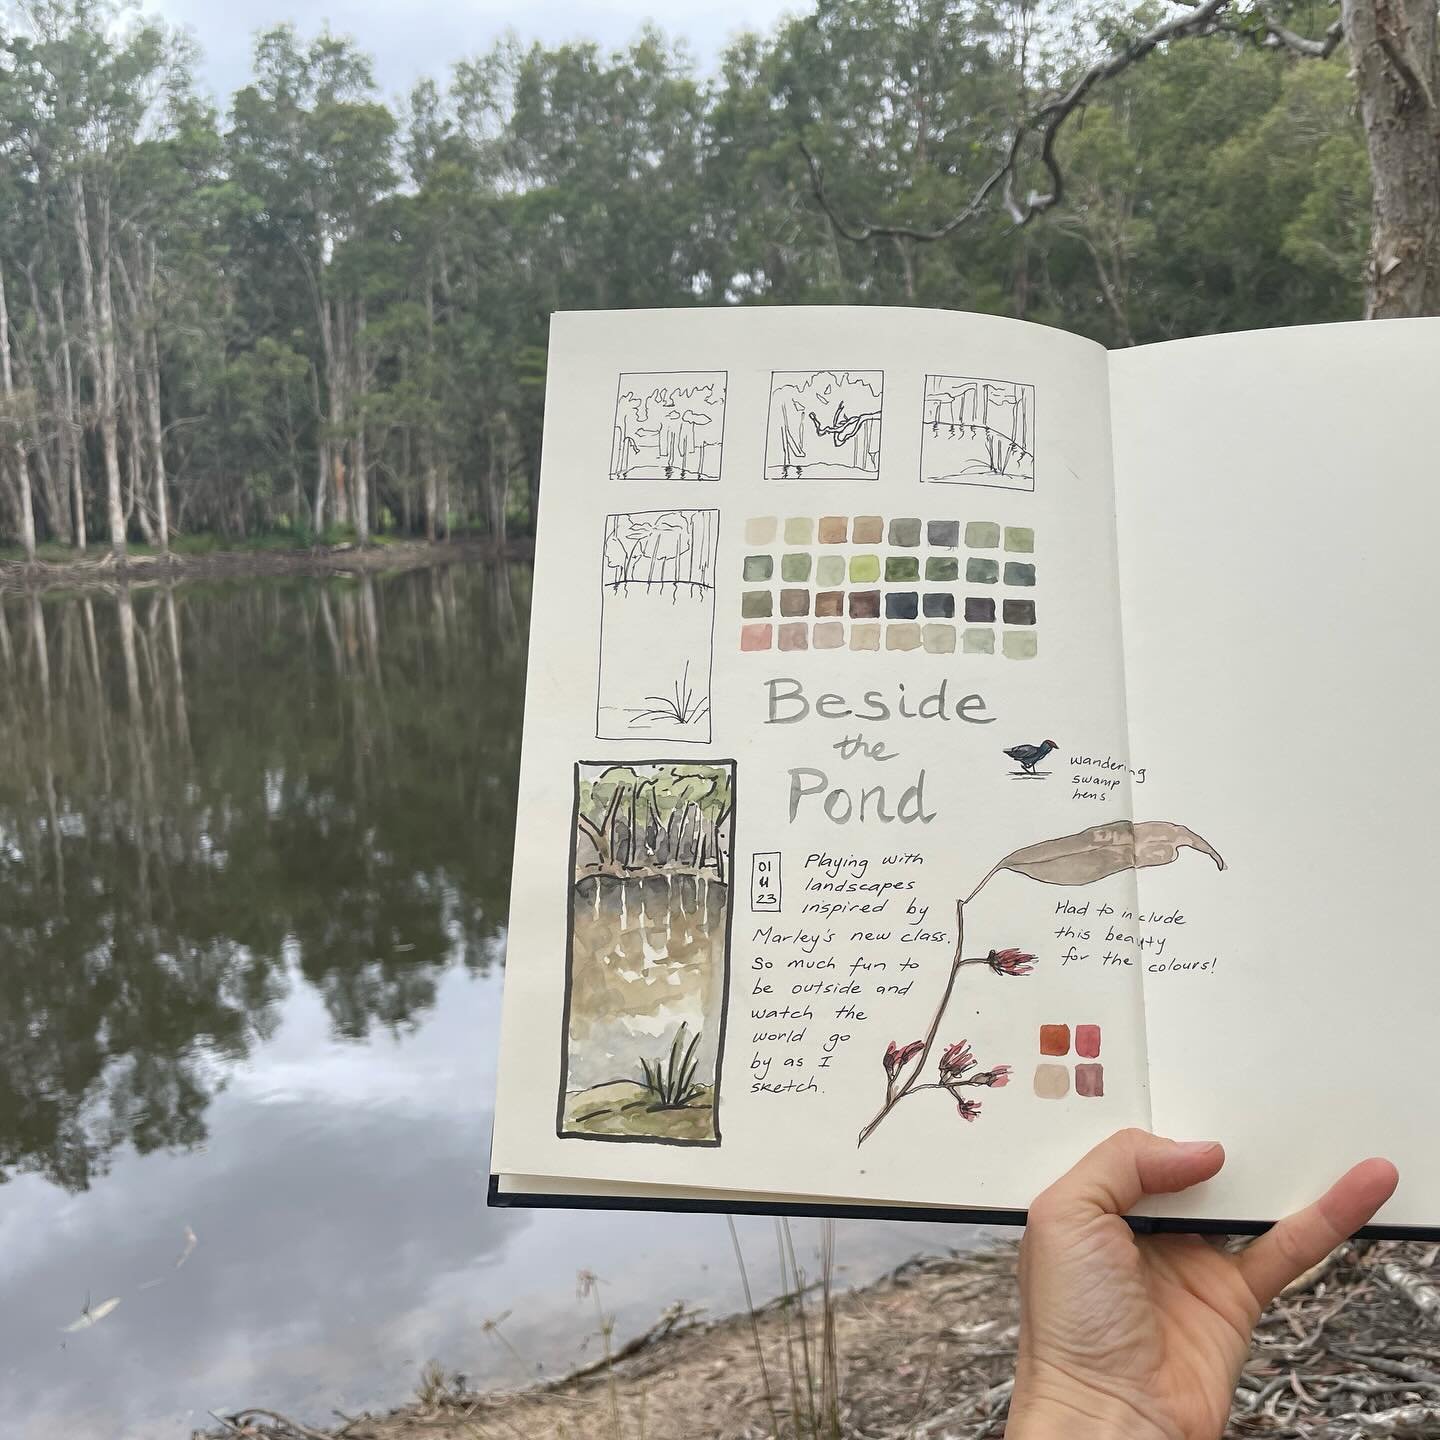 Adding landscape sketches to our nature journals is a wonderful way to connect with our surroundings, come to understand more about nature, and put what we are seeing into a wider context. Plus&hellip;it&rsquo;s so much fun! This page was done after 